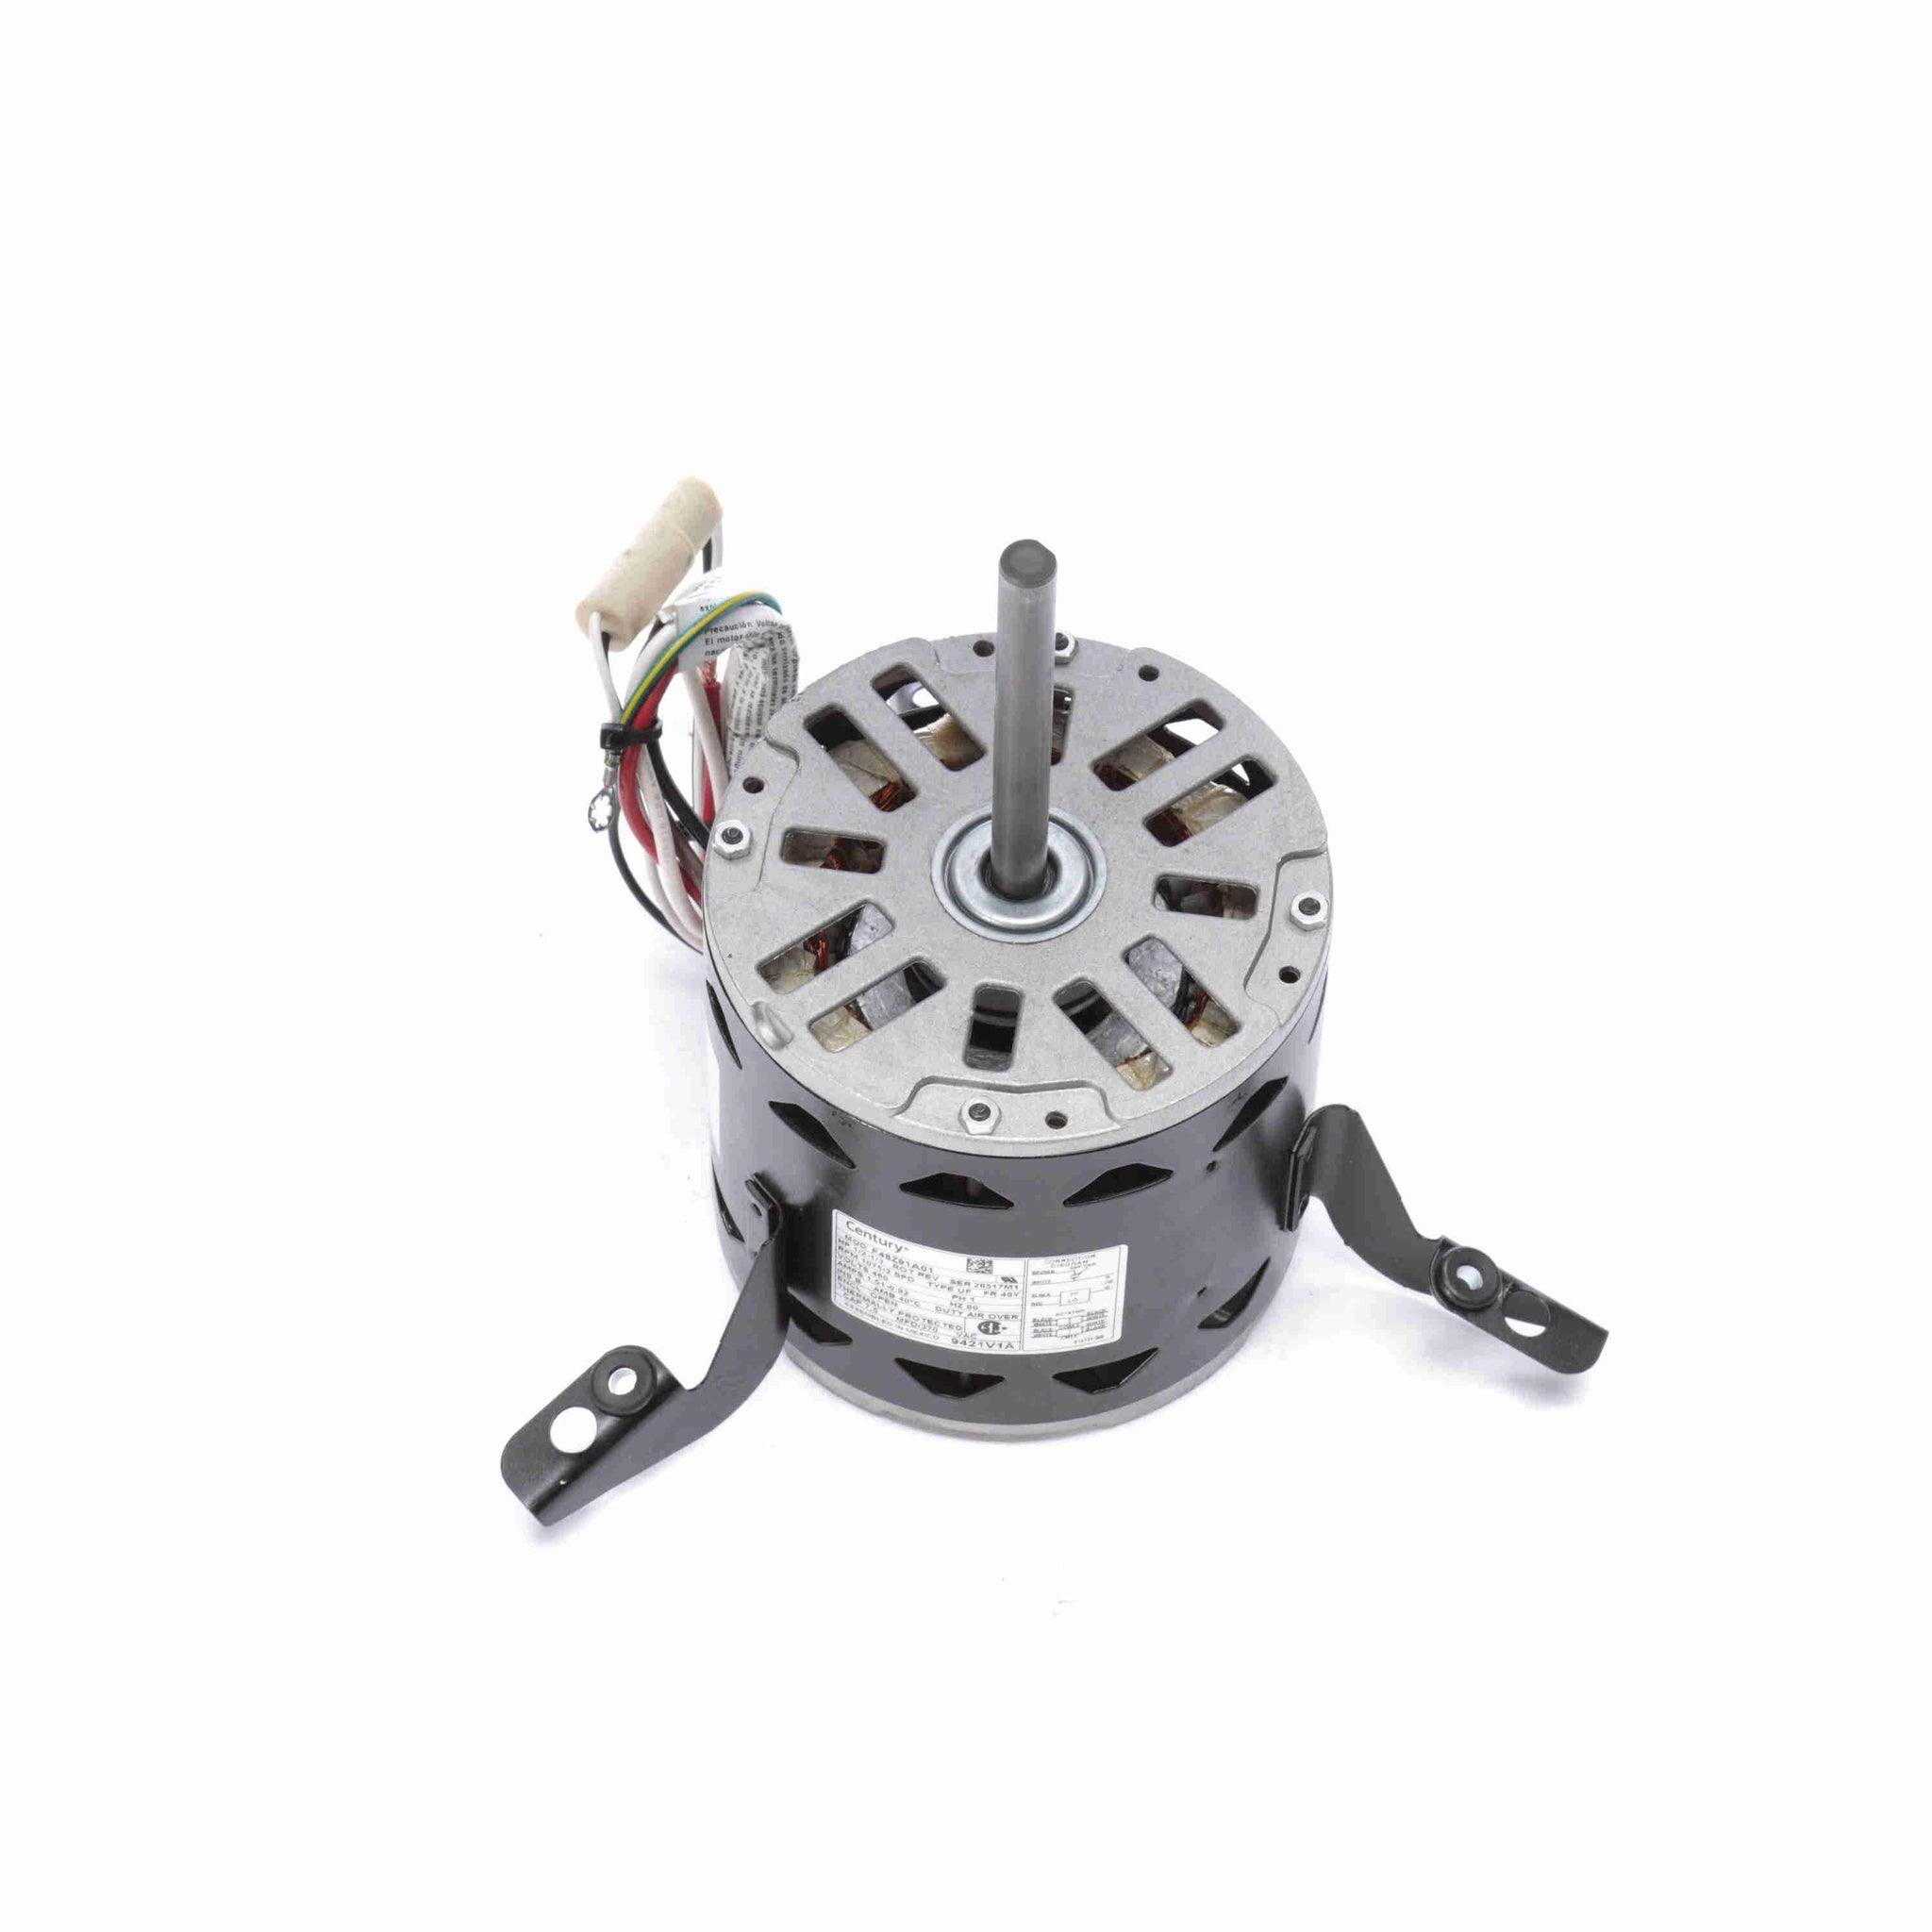 9421V1A -  1/2-1/3 HP Fan Coil / Room Air Conditioner Motor, 1075 RPM, 2 Speed, 460 Volts, 48 Frame, OAO - Hardware & Moreee